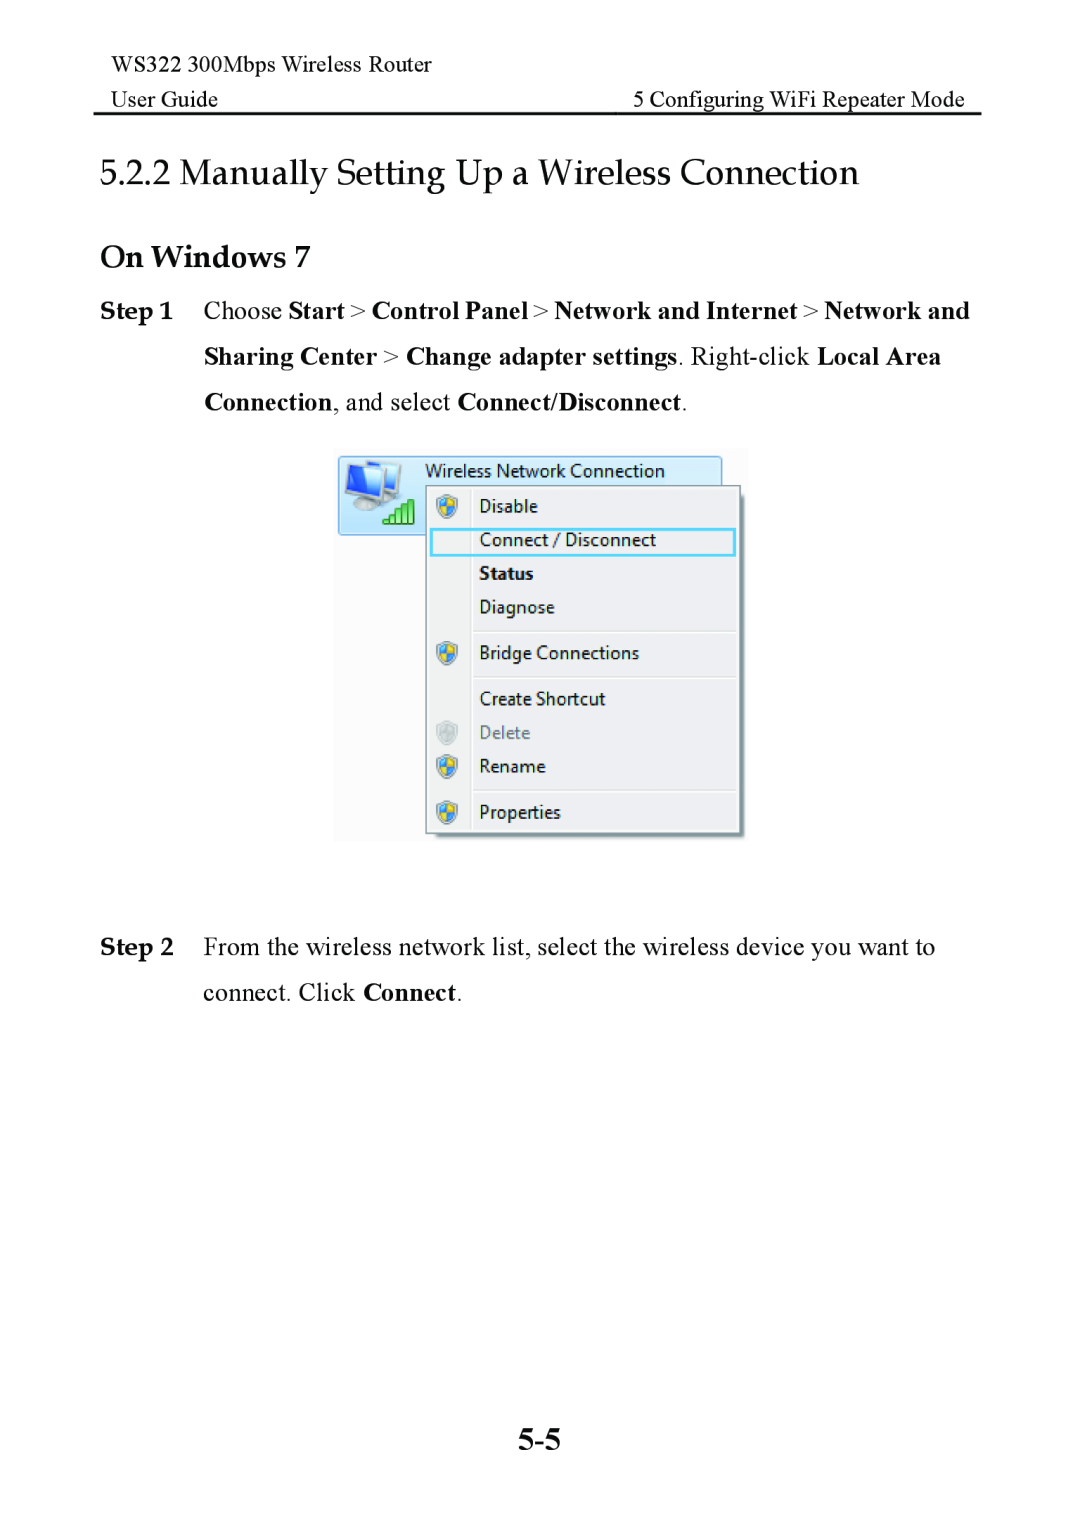 Huawei manual Manually Setting Up a Wireless Connection, On Windows, WS322 300Mbps Wireless Router, User Guide 